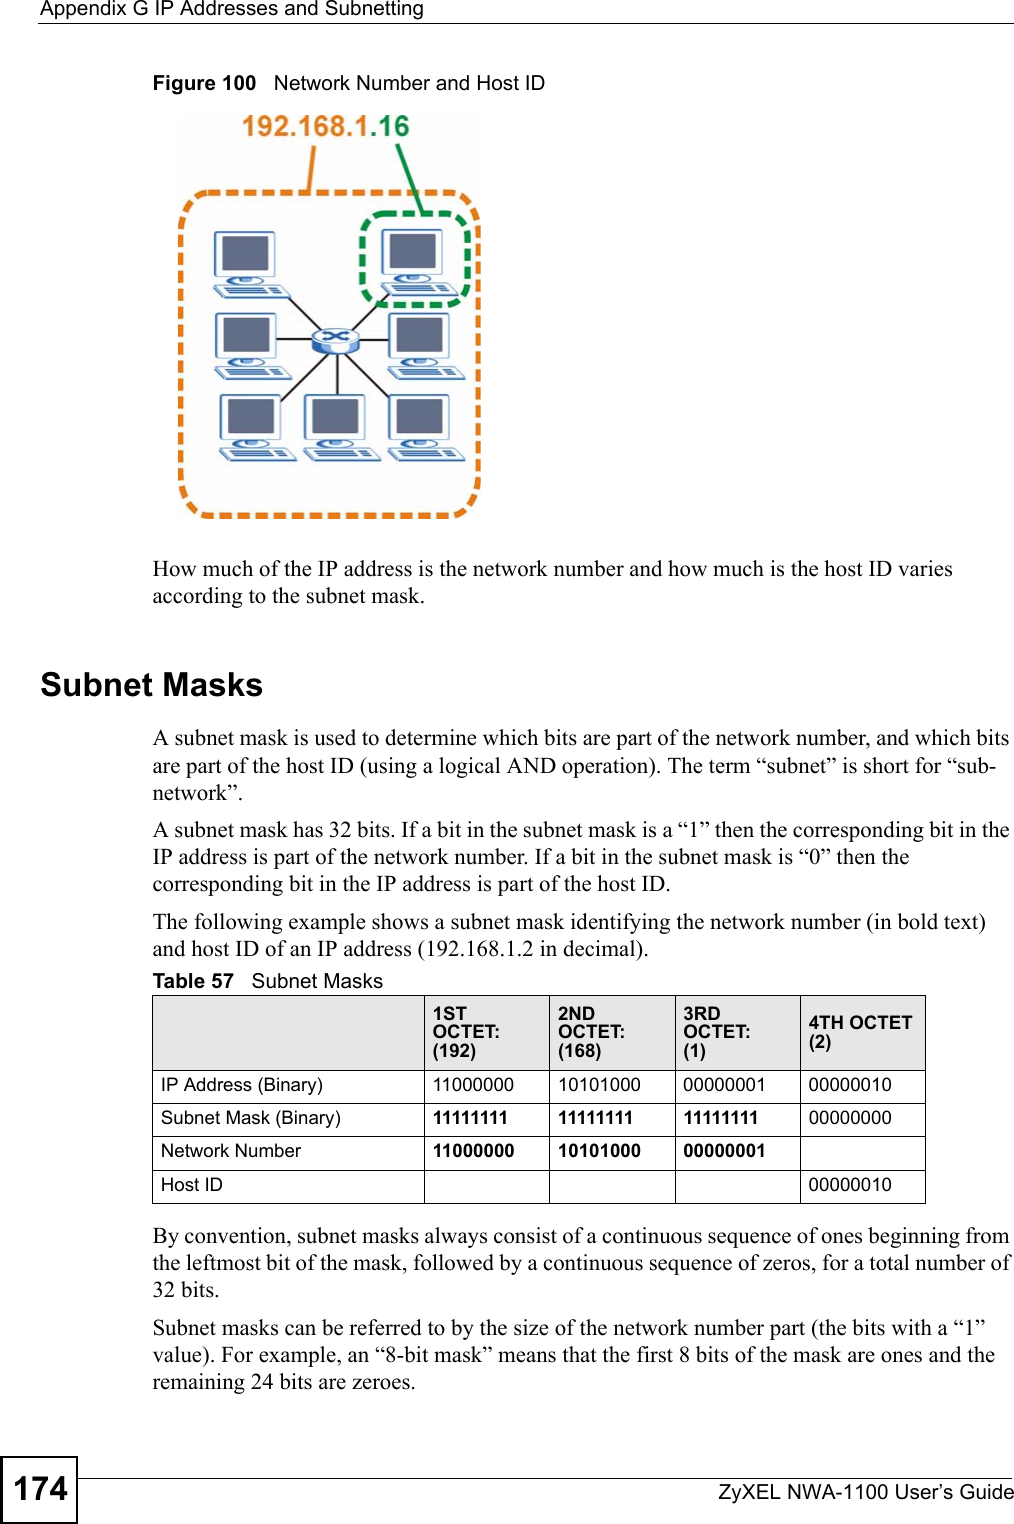 Appendix G IP Addresses and SubnettingZyXEL NWA-1100 User’s Guide174Figure 100   Network Number and Host IDHow much of the IP address is the network number and how much is the host ID varies according to the subnet mask. Subnet MasksA subnet mask is used to determine which bits are part of the network number, and which bits are part of the host ID (using a logical AND operation). The term “subnet” is short for “sub-network”.A subnet mask has 32 bits. If a bit in the subnet mask is a “1” then the corresponding bit in the IP address is part of the network number. If a bit in the subnet mask is “0” then the corresponding bit in the IP address is part of the host ID. The following example shows a subnet mask identifying the network number (in bold text) and host ID of an IP address (192.168.1.2 in decimal).By convention, subnet masks always consist of a continuous sequence of ones beginning from the leftmost bit of the mask, followed by a continuous sequence of zeros, for a total number of 32 bits.Subnet masks can be referred to by the size of the network number part (the bits with a “1” value). For example, an “8-bit mask” means that the first 8 bits of the mask are ones and the remaining 24 bits are zeroes.Table 57   Subnet Masks1ST OCTET:(192)2ND OCTET:(168)3RD OCTET:(1)4TH OCTET(2)IP Address (Binary) 11000000 10101000 00000001 00000010Subnet Mask (Binary) 11111111 11111111 11111111 00000000Network Number 11000000 10101000 00000001Host ID 00000010